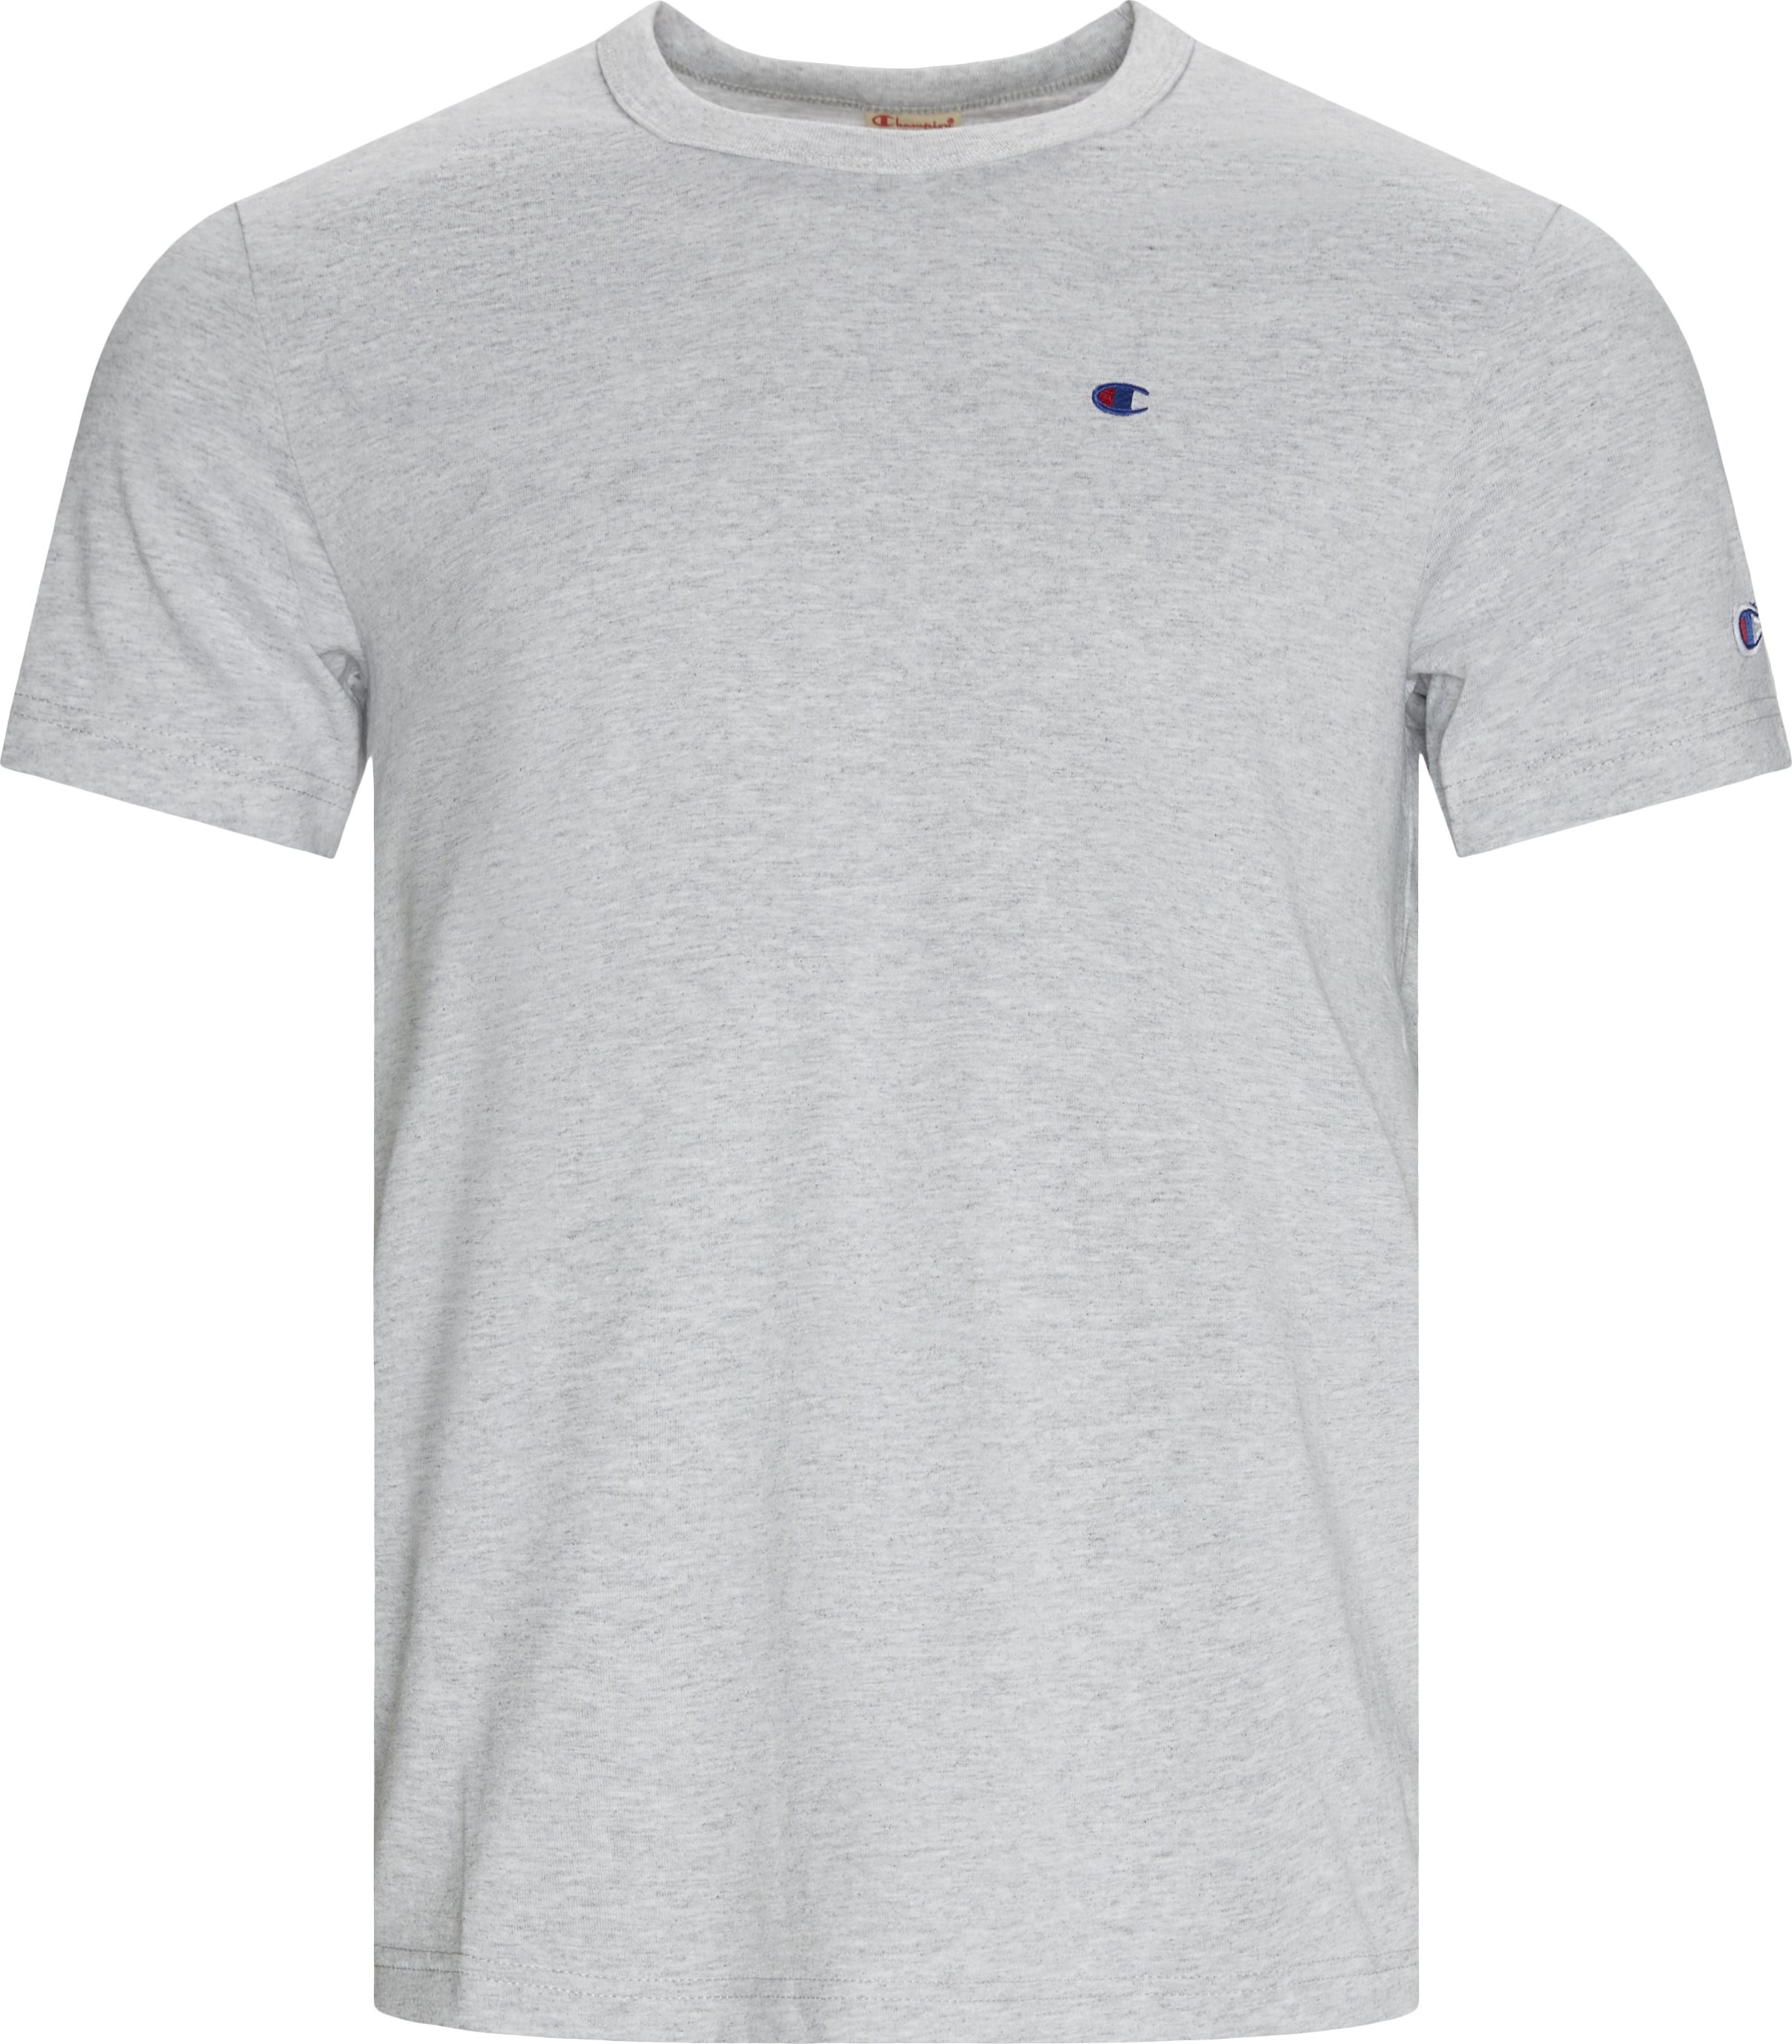 Small Chest Logo Tee - T-shirts - Regular fit - Grey